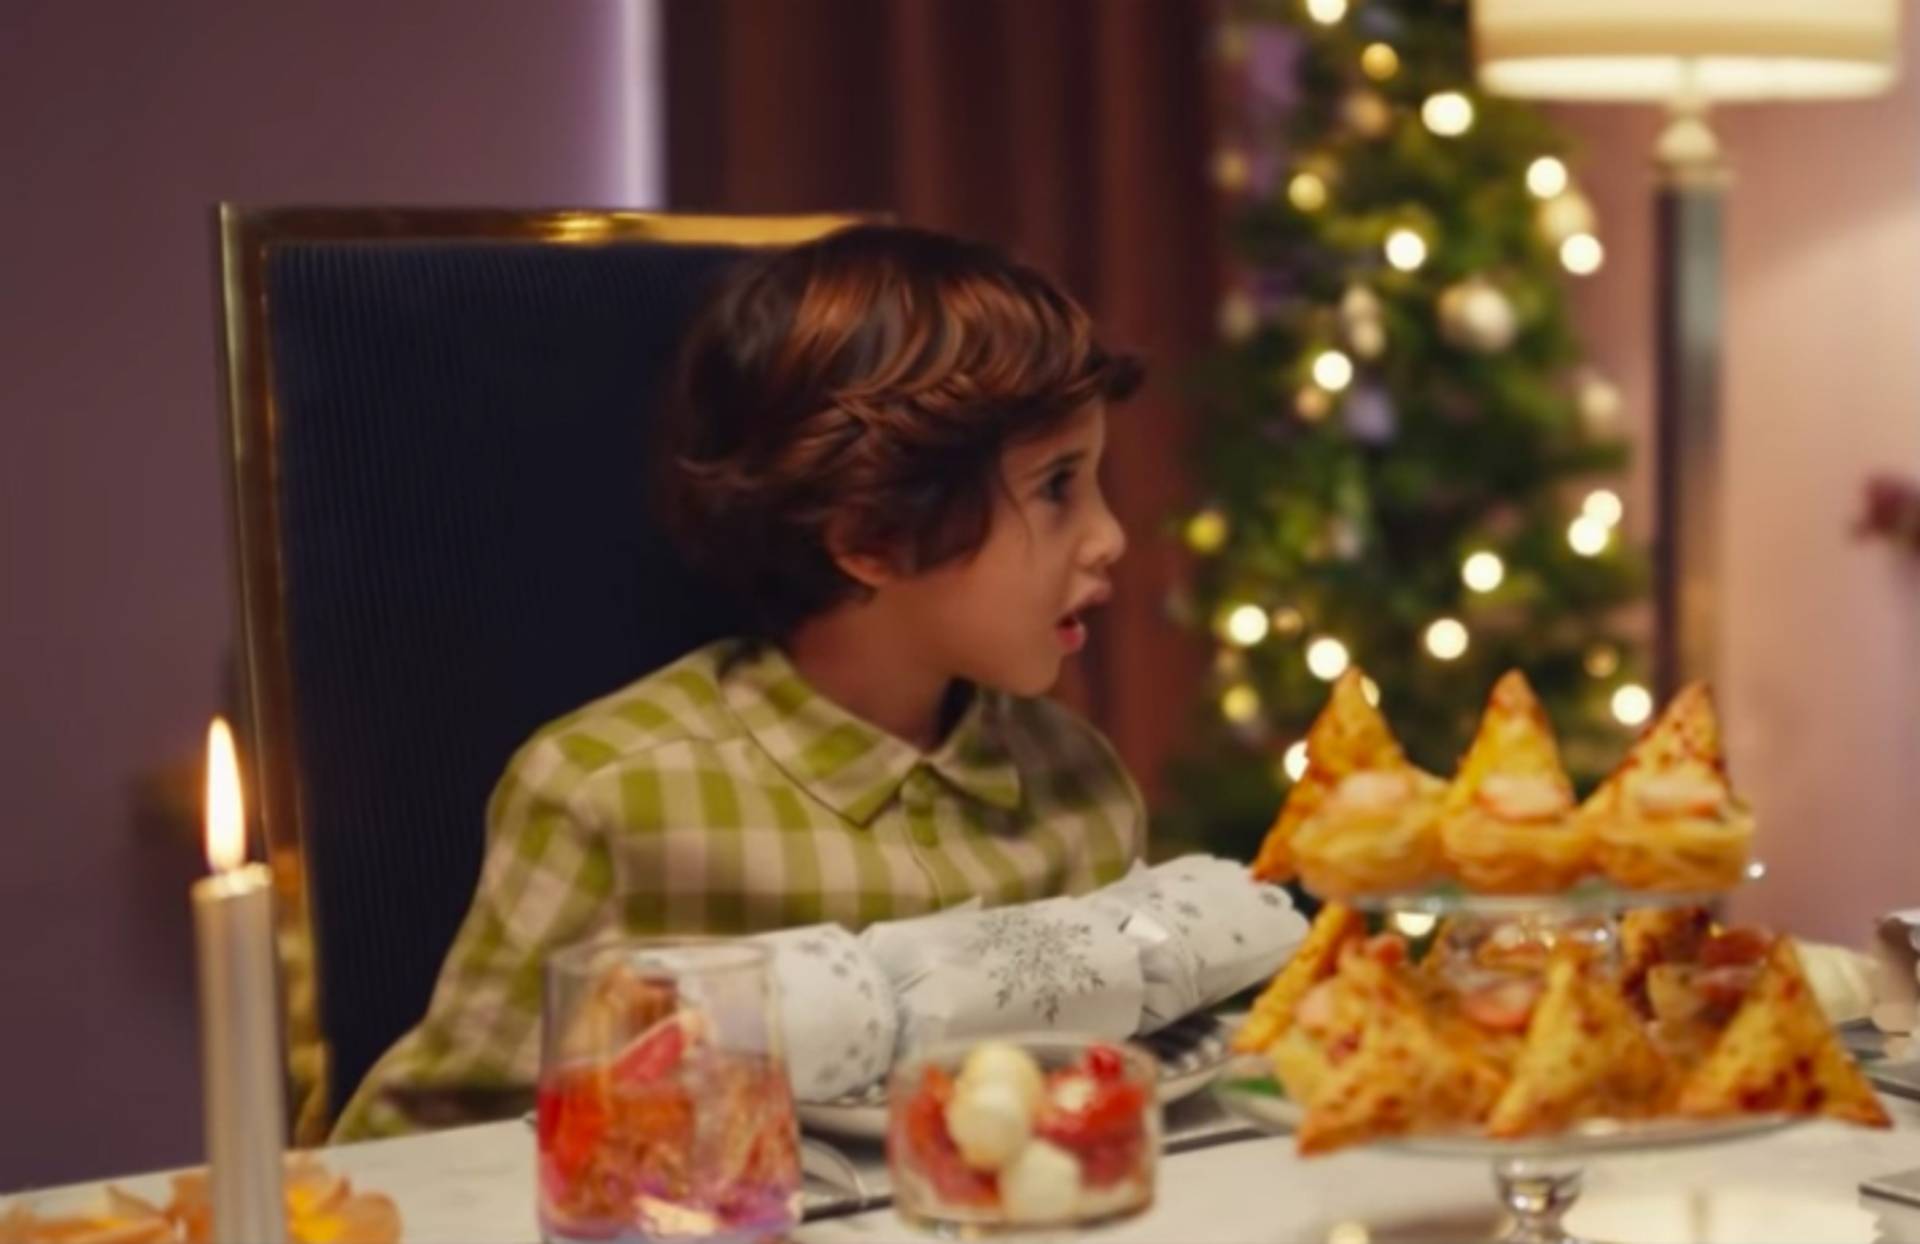 Tesco's anti-naughty list ad relieves pandemic guilt